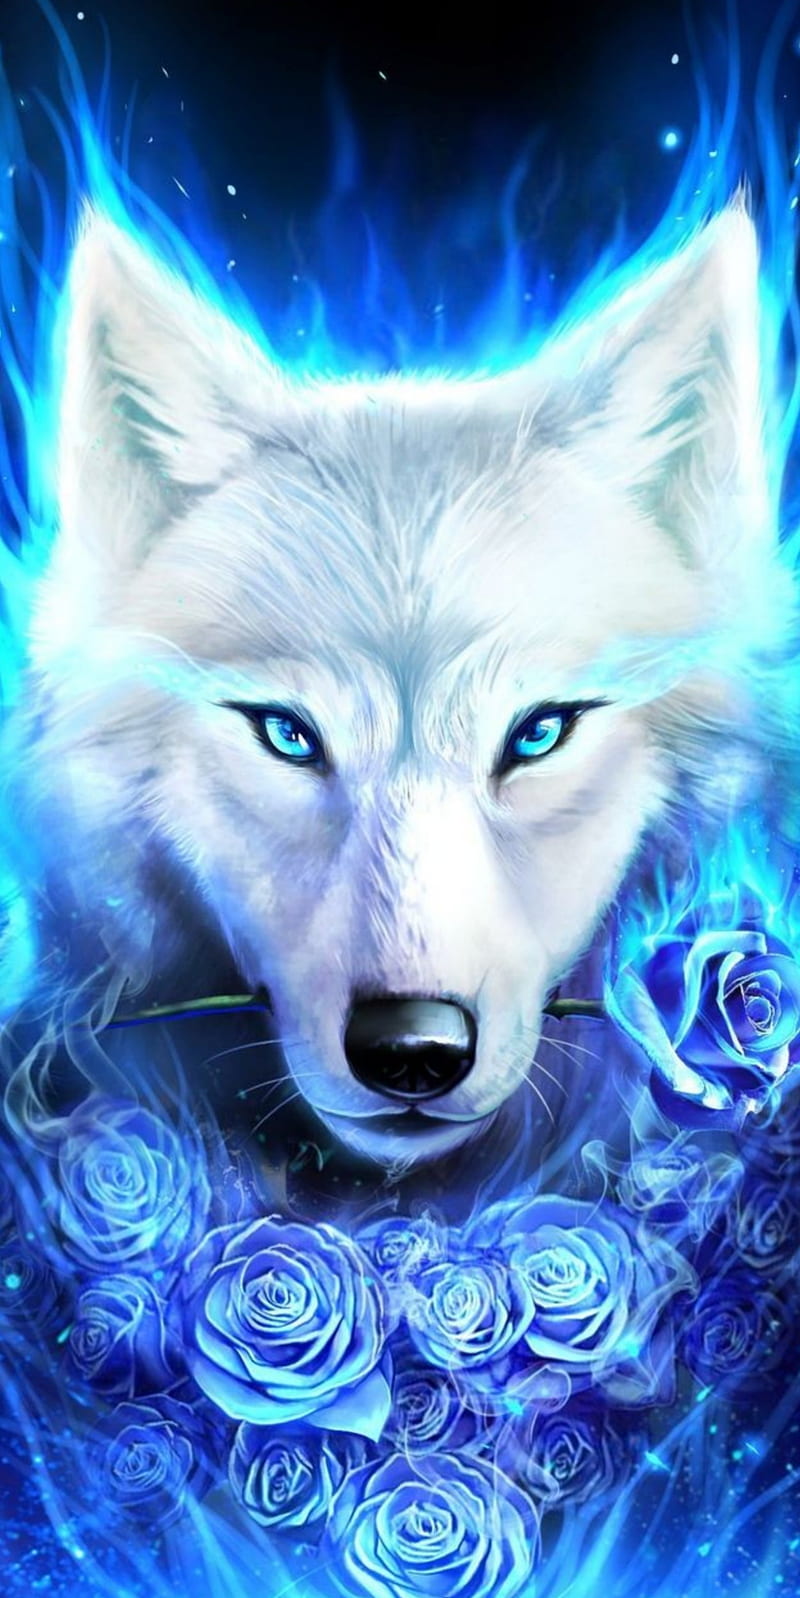 White Wolf in the Woods Digital Painting JPEG Wall Art Image